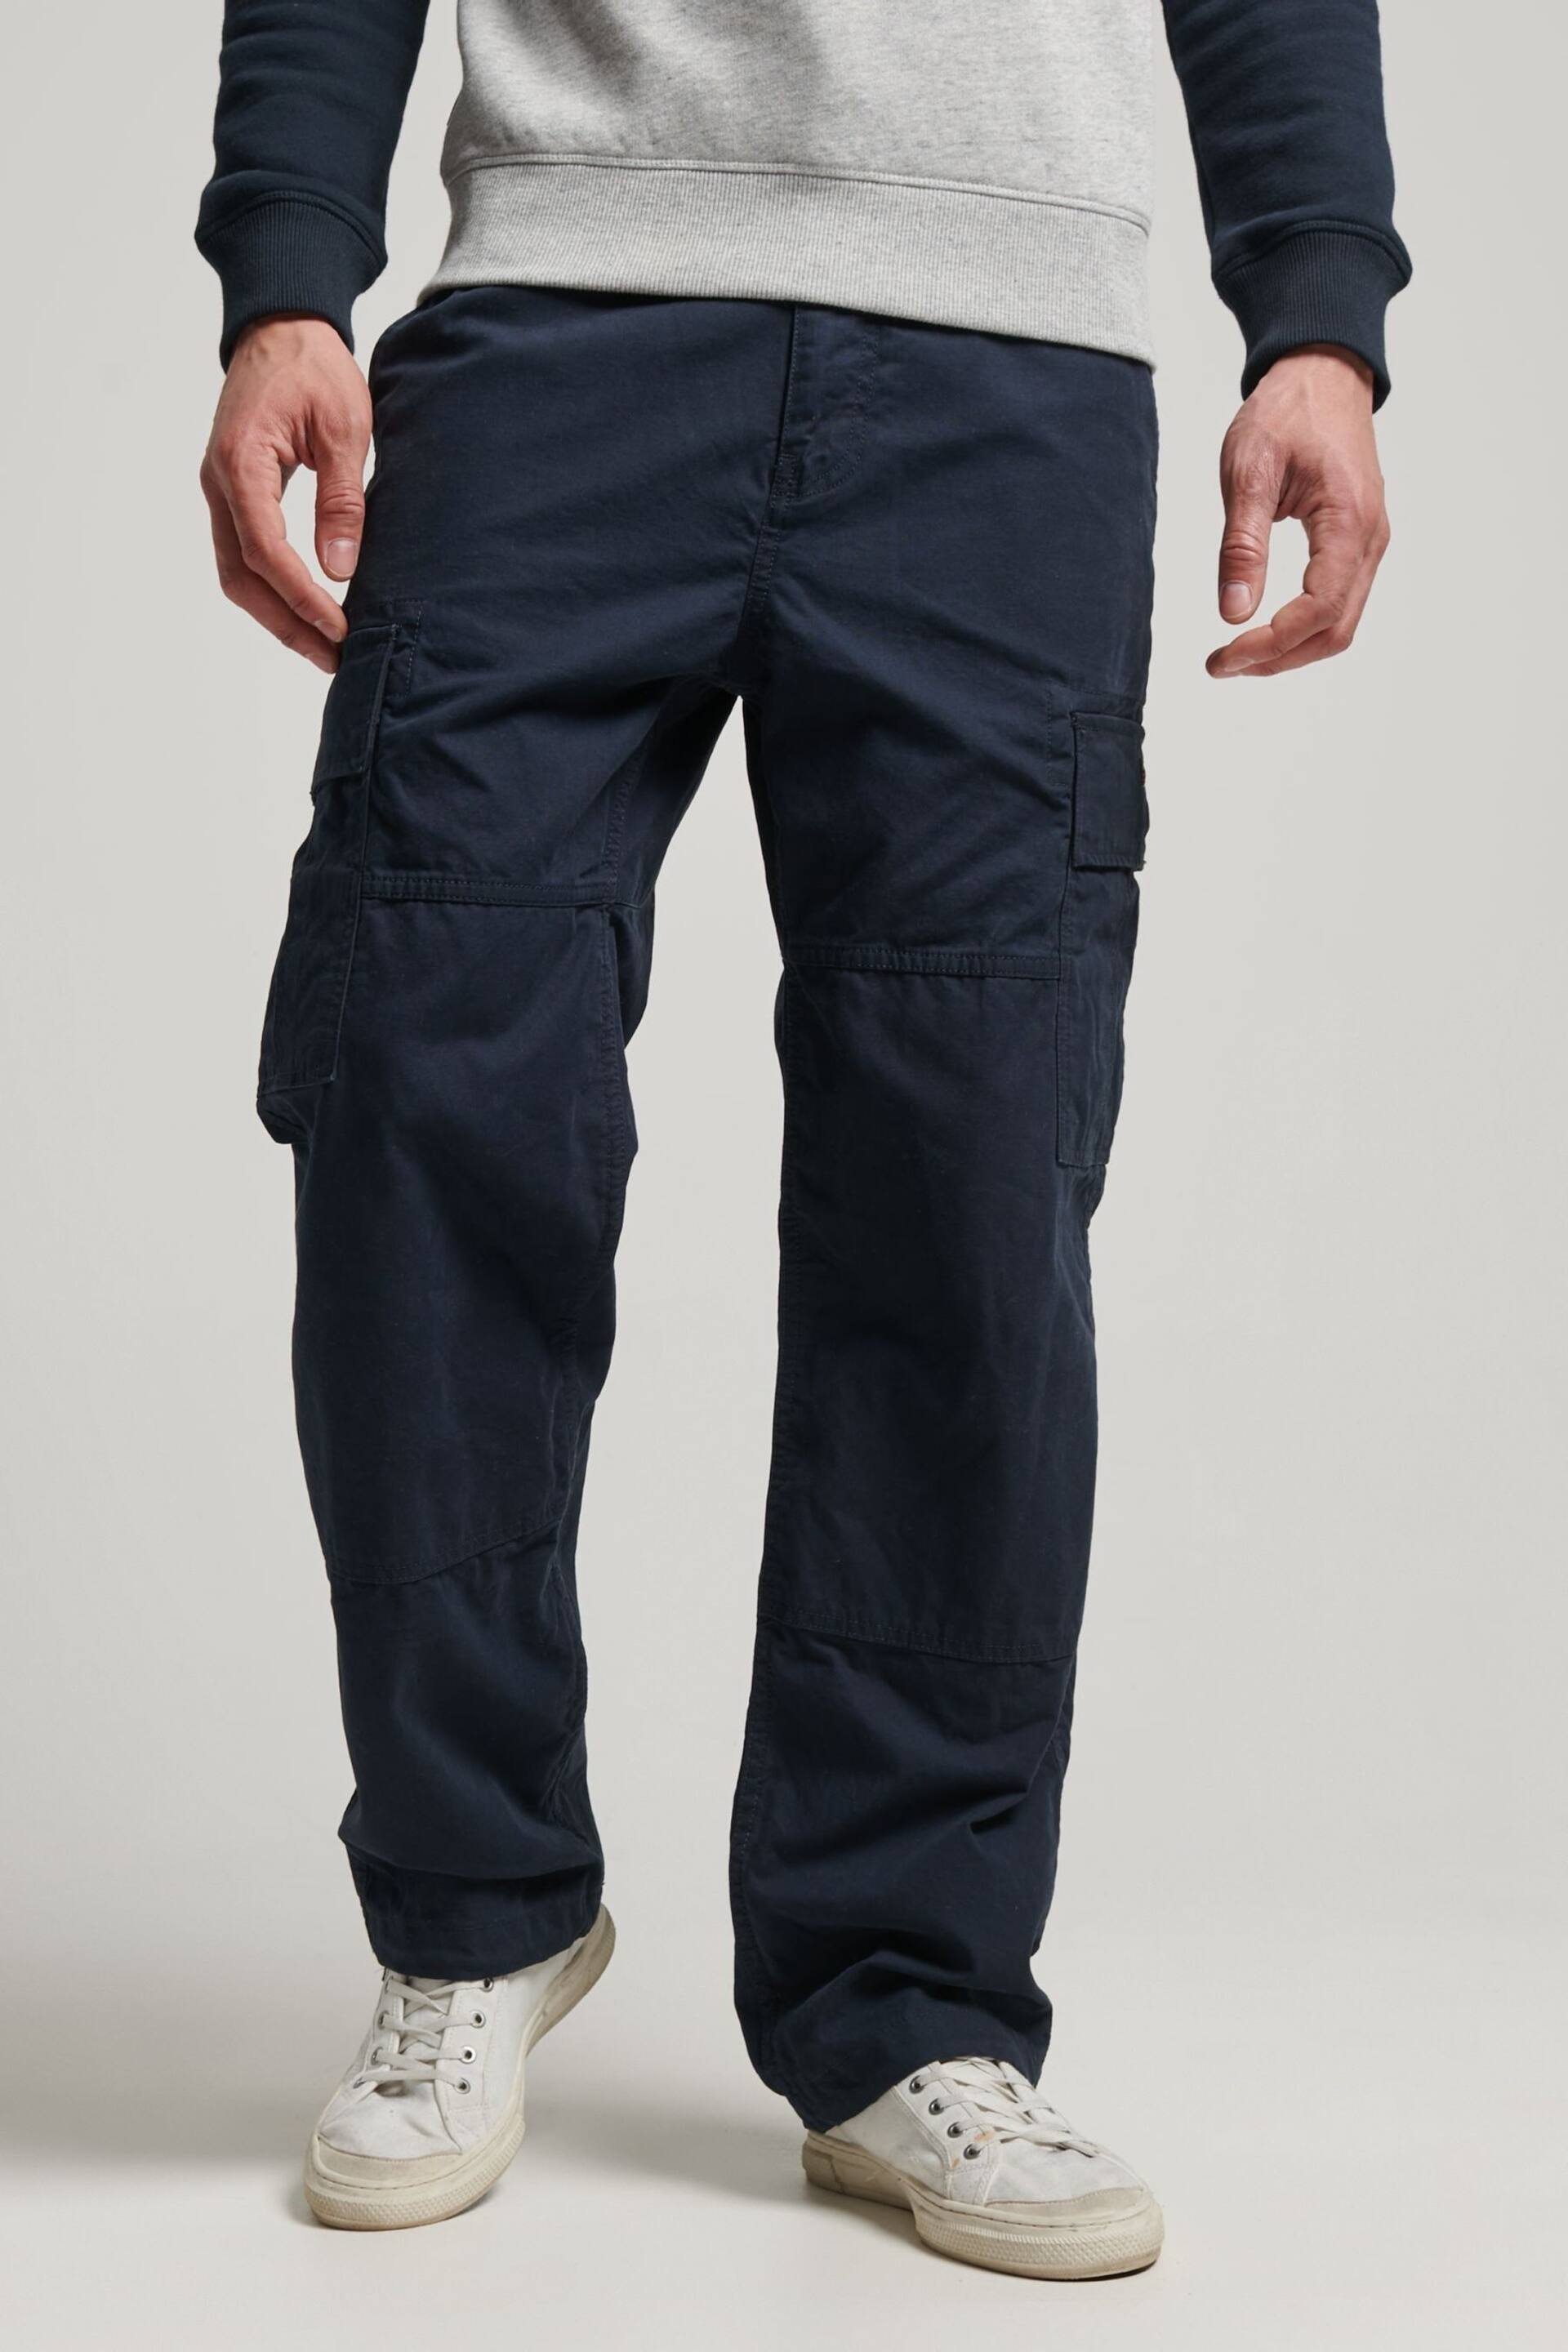 Superdry Eclipse Navy Core Cargo Utility Cargo Trousers - Image 1 of 8